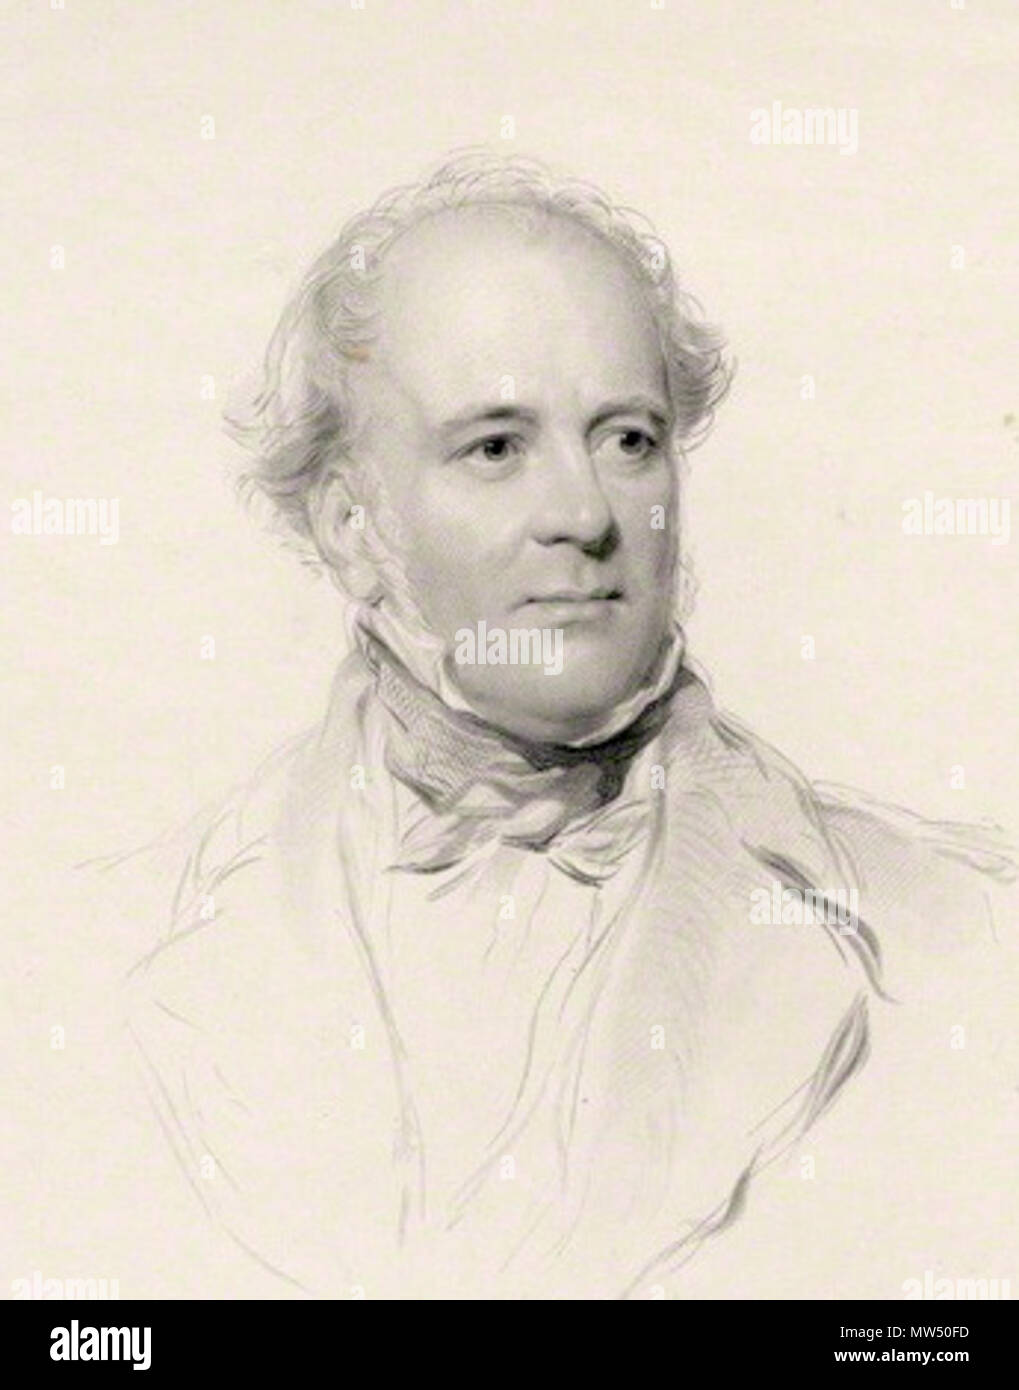 . English: Andrew Rutherfurd, Lord Rutherfurd (1791-1854) . circa 1852. possibly by Frederick Christian Lewis, after George Richmond 533 LordRuterfurd Stock Photo